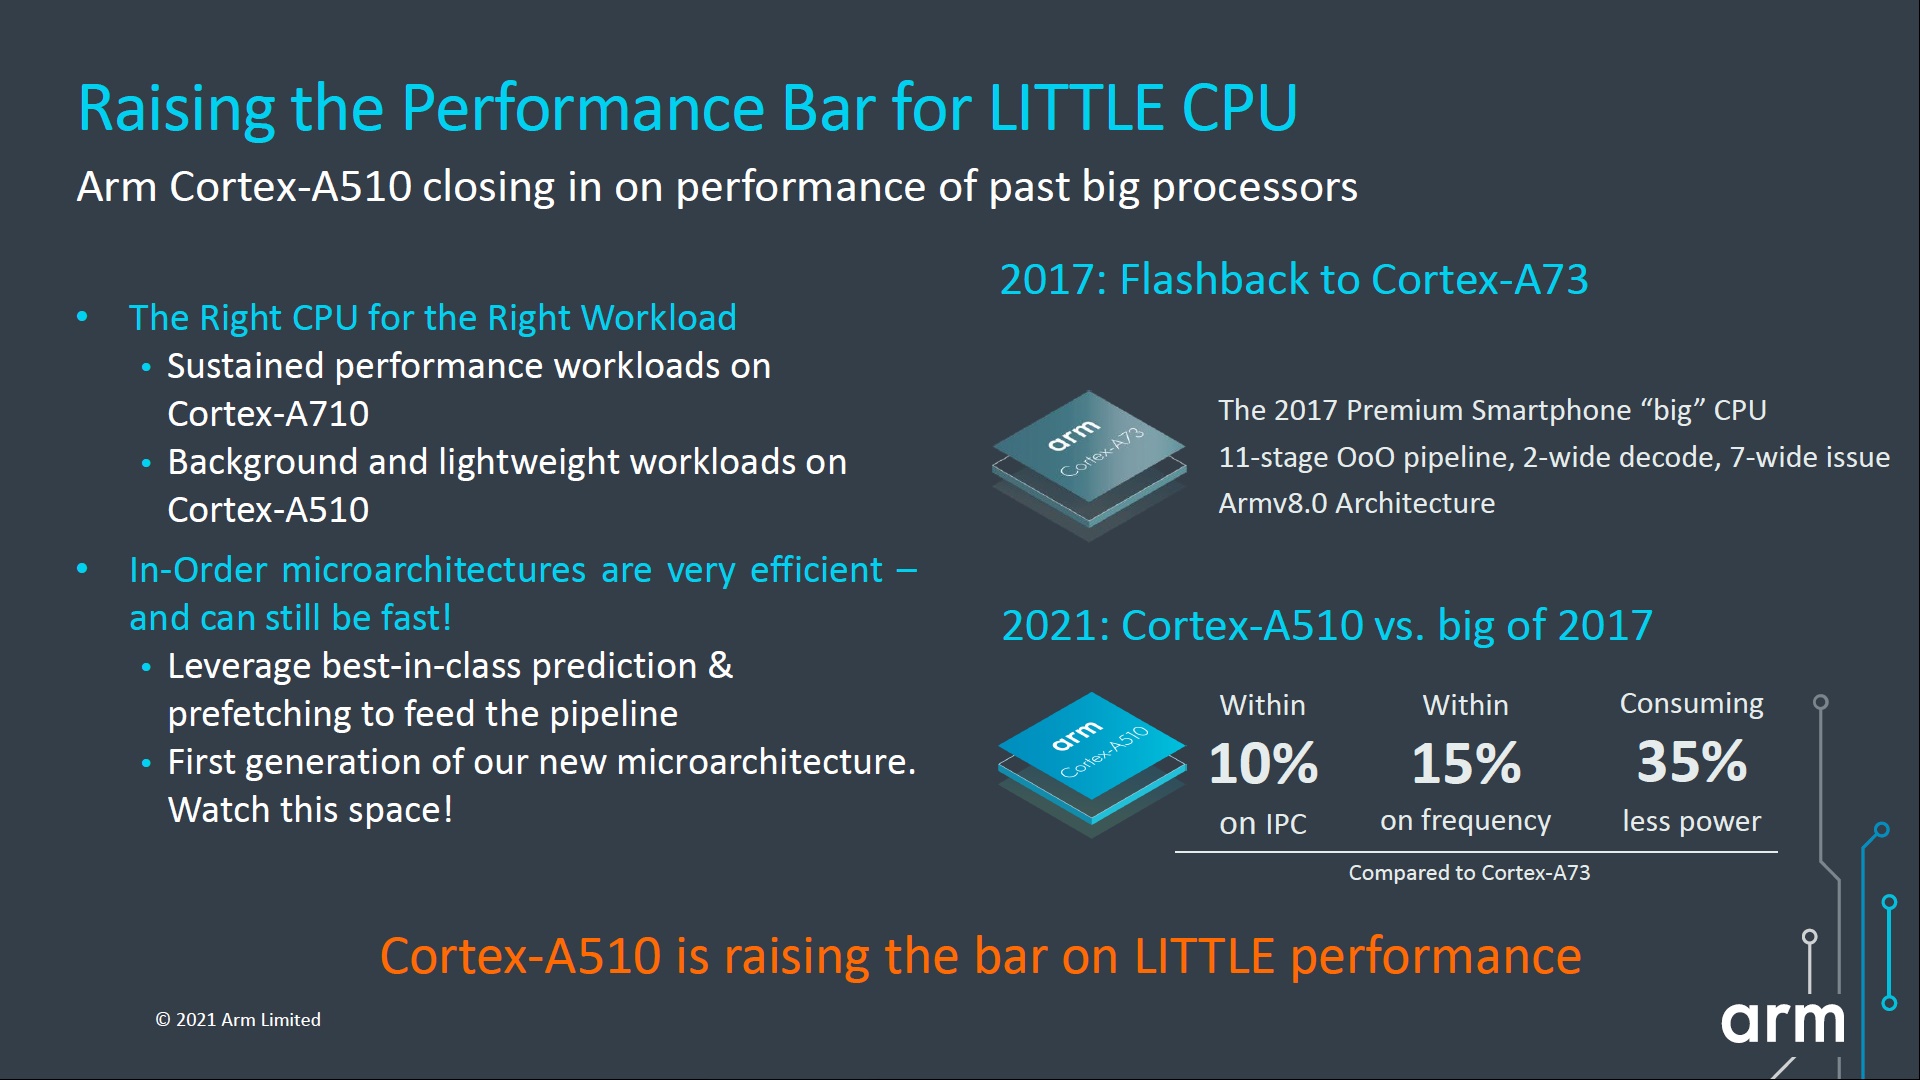 Cortex A510 closing in on perf of past big processors like the Cortex A73